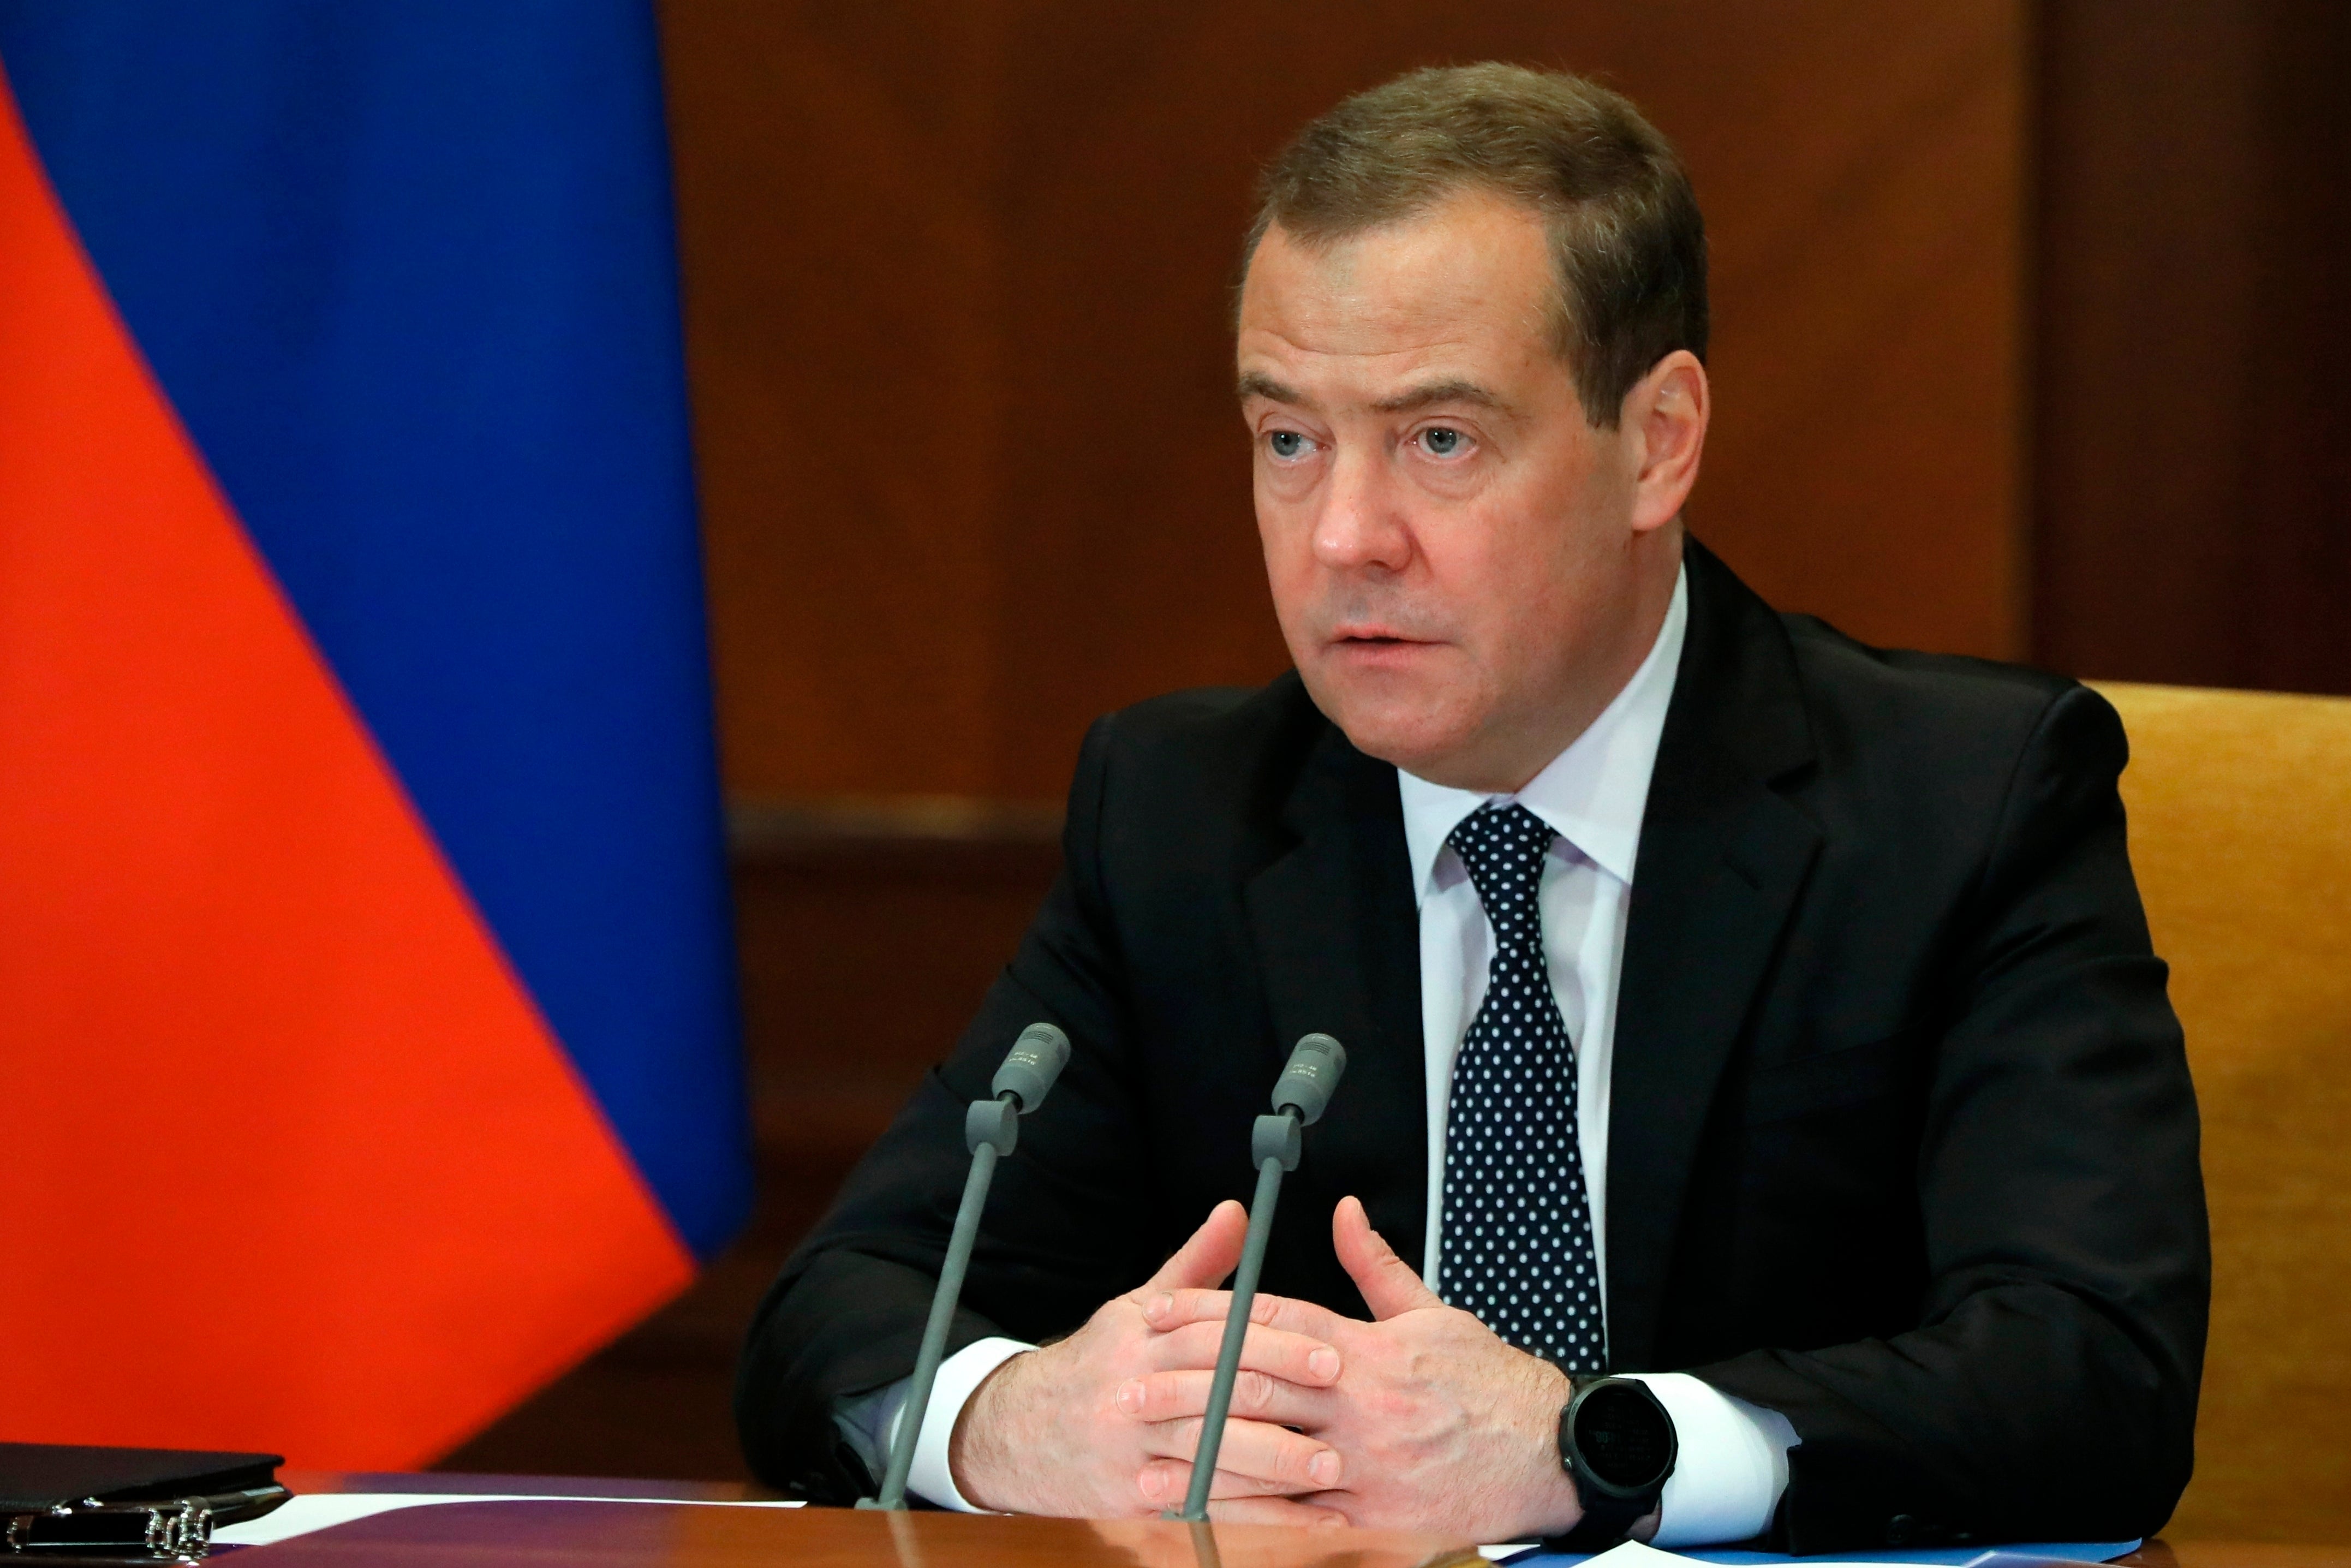 Former Russian president Dmitry Medvedev has issued a stern warning to the US and its allies